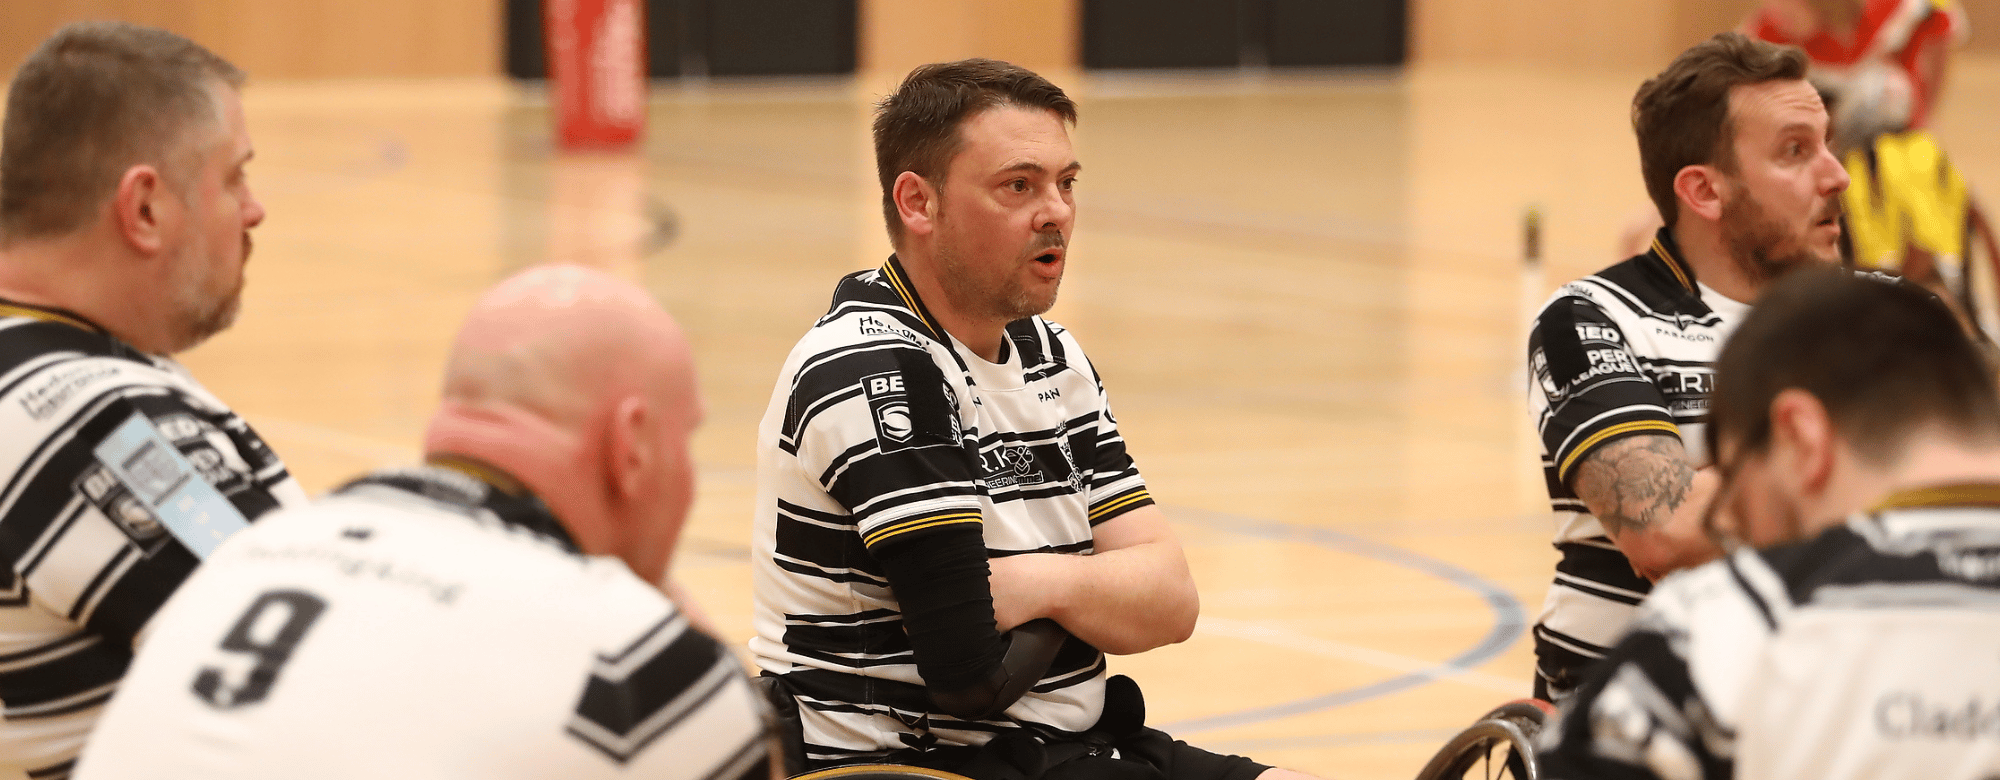 Swainger Nominated For Betfred Wheelchair Super League Coach of the Year